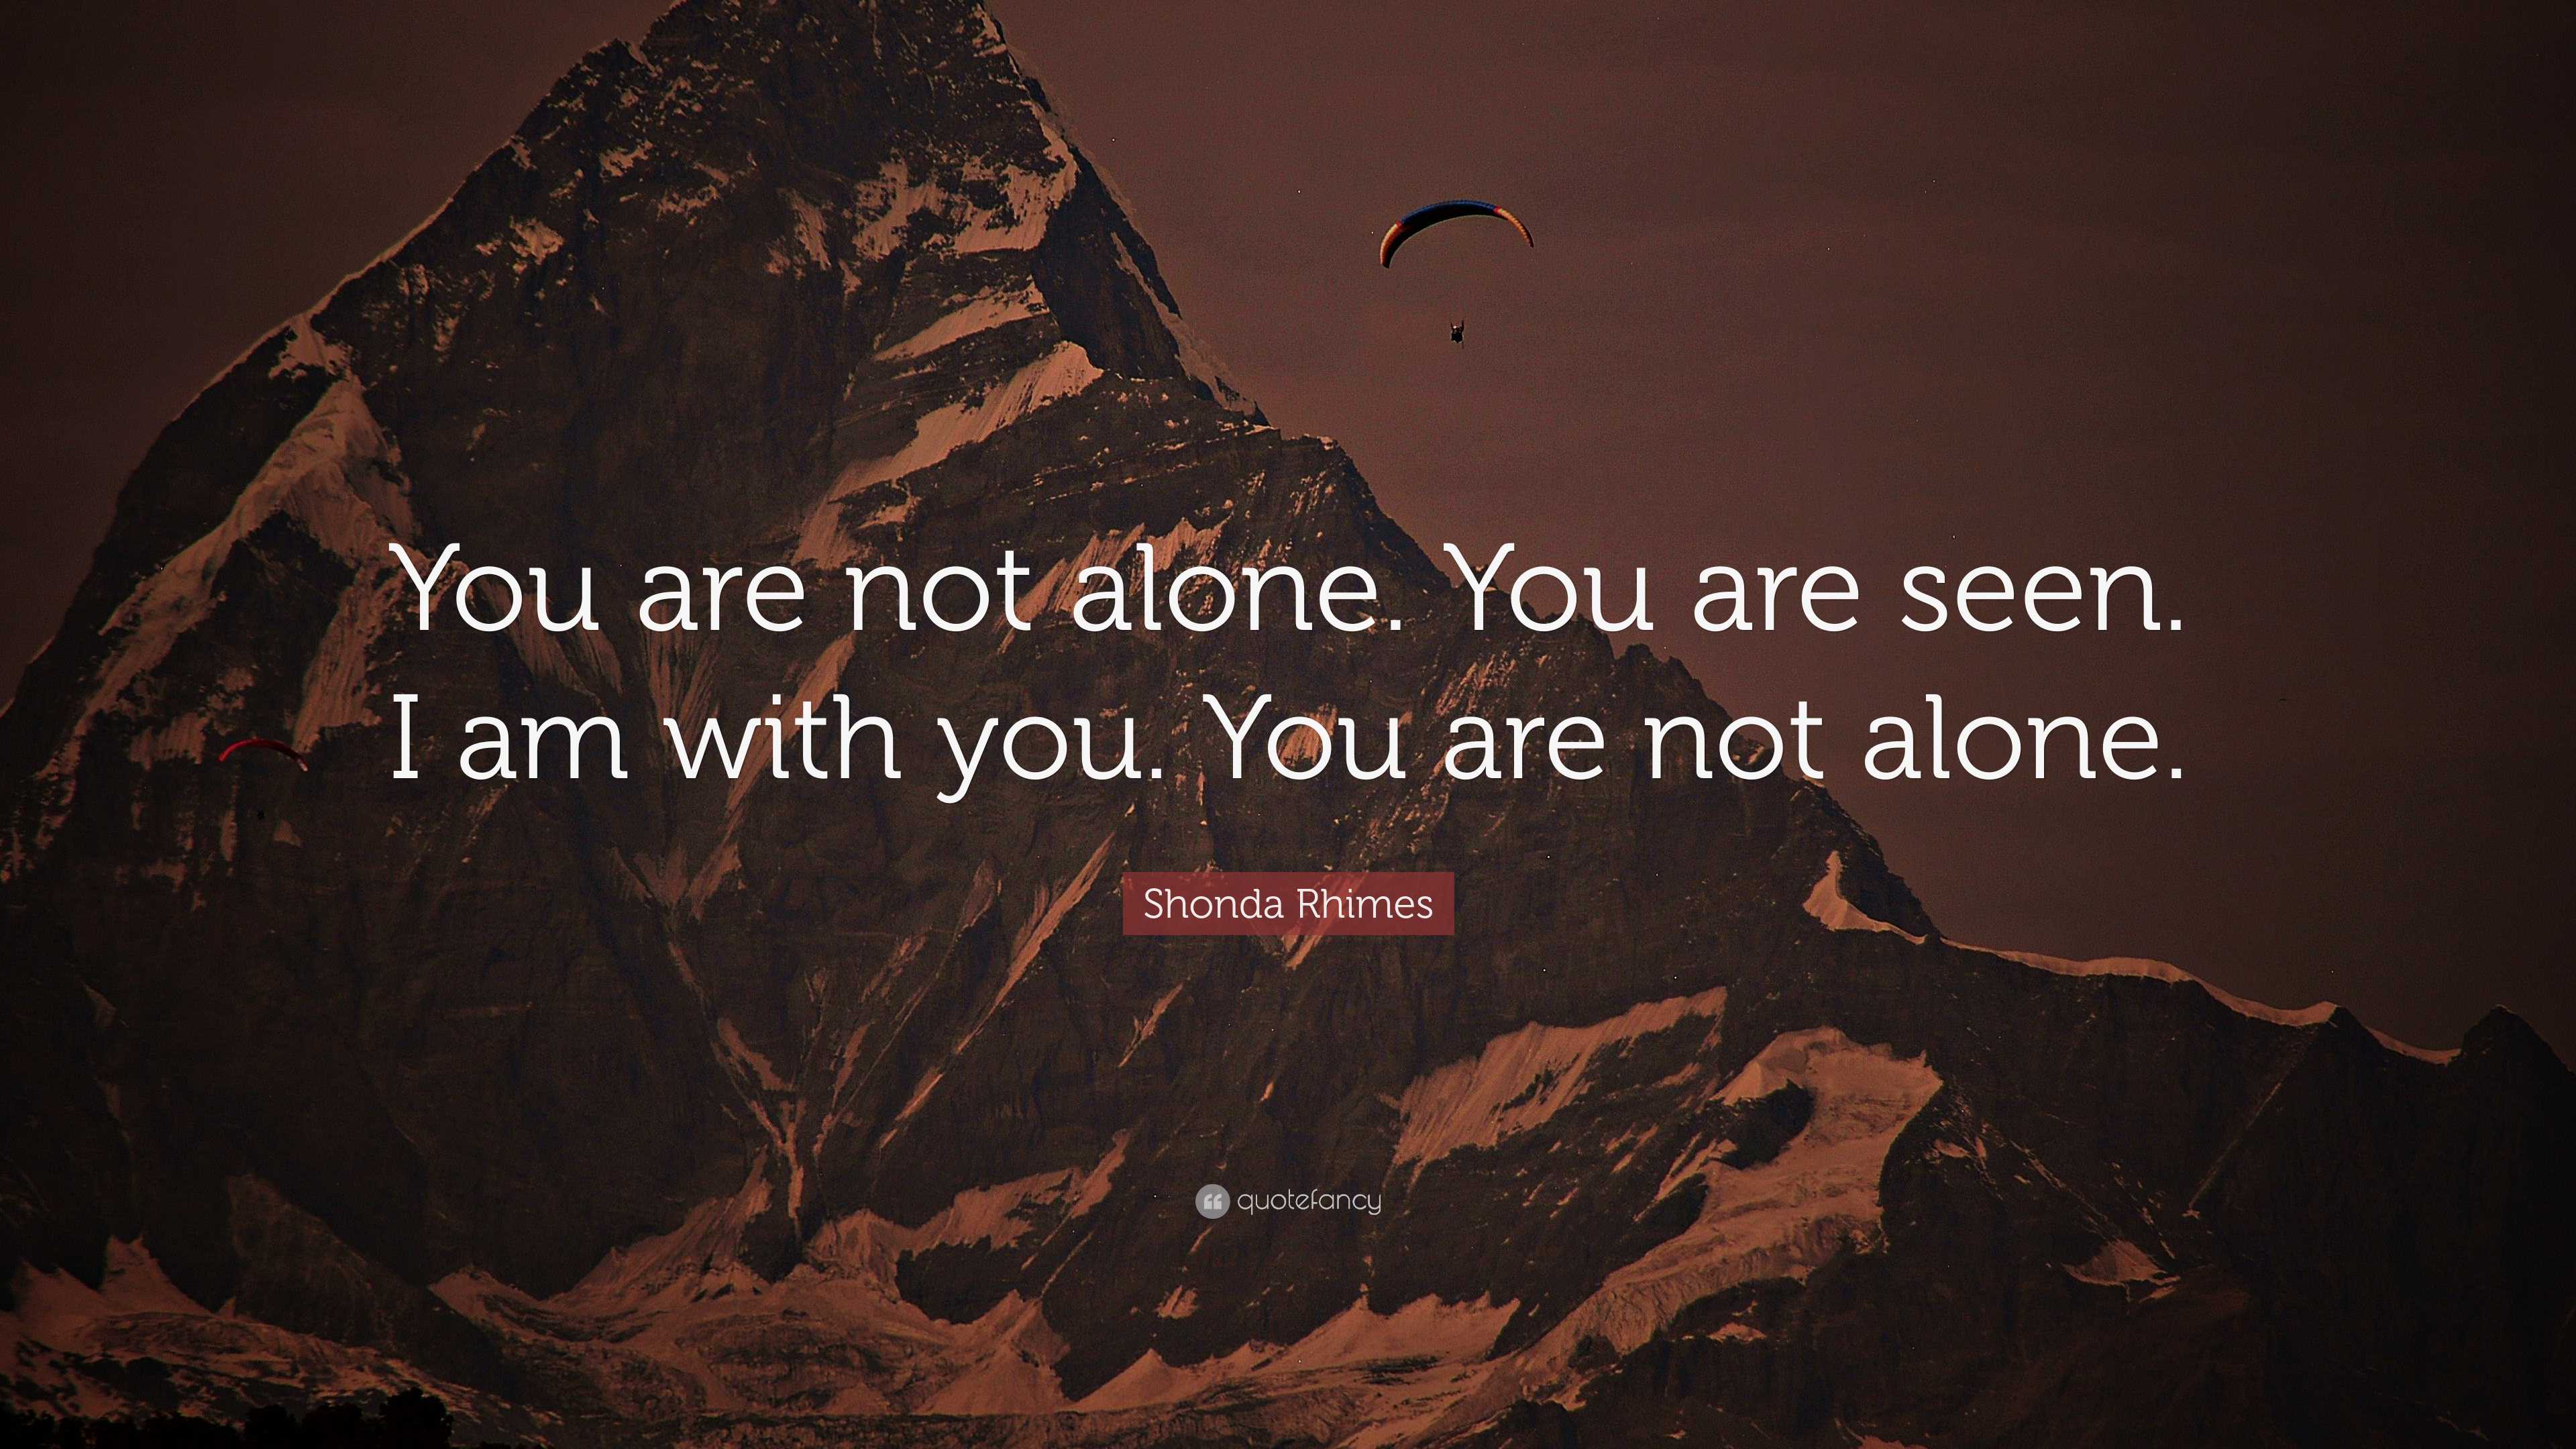 Shonda Rhimes Quote: “You are not alone. You are seen. I am with you ...